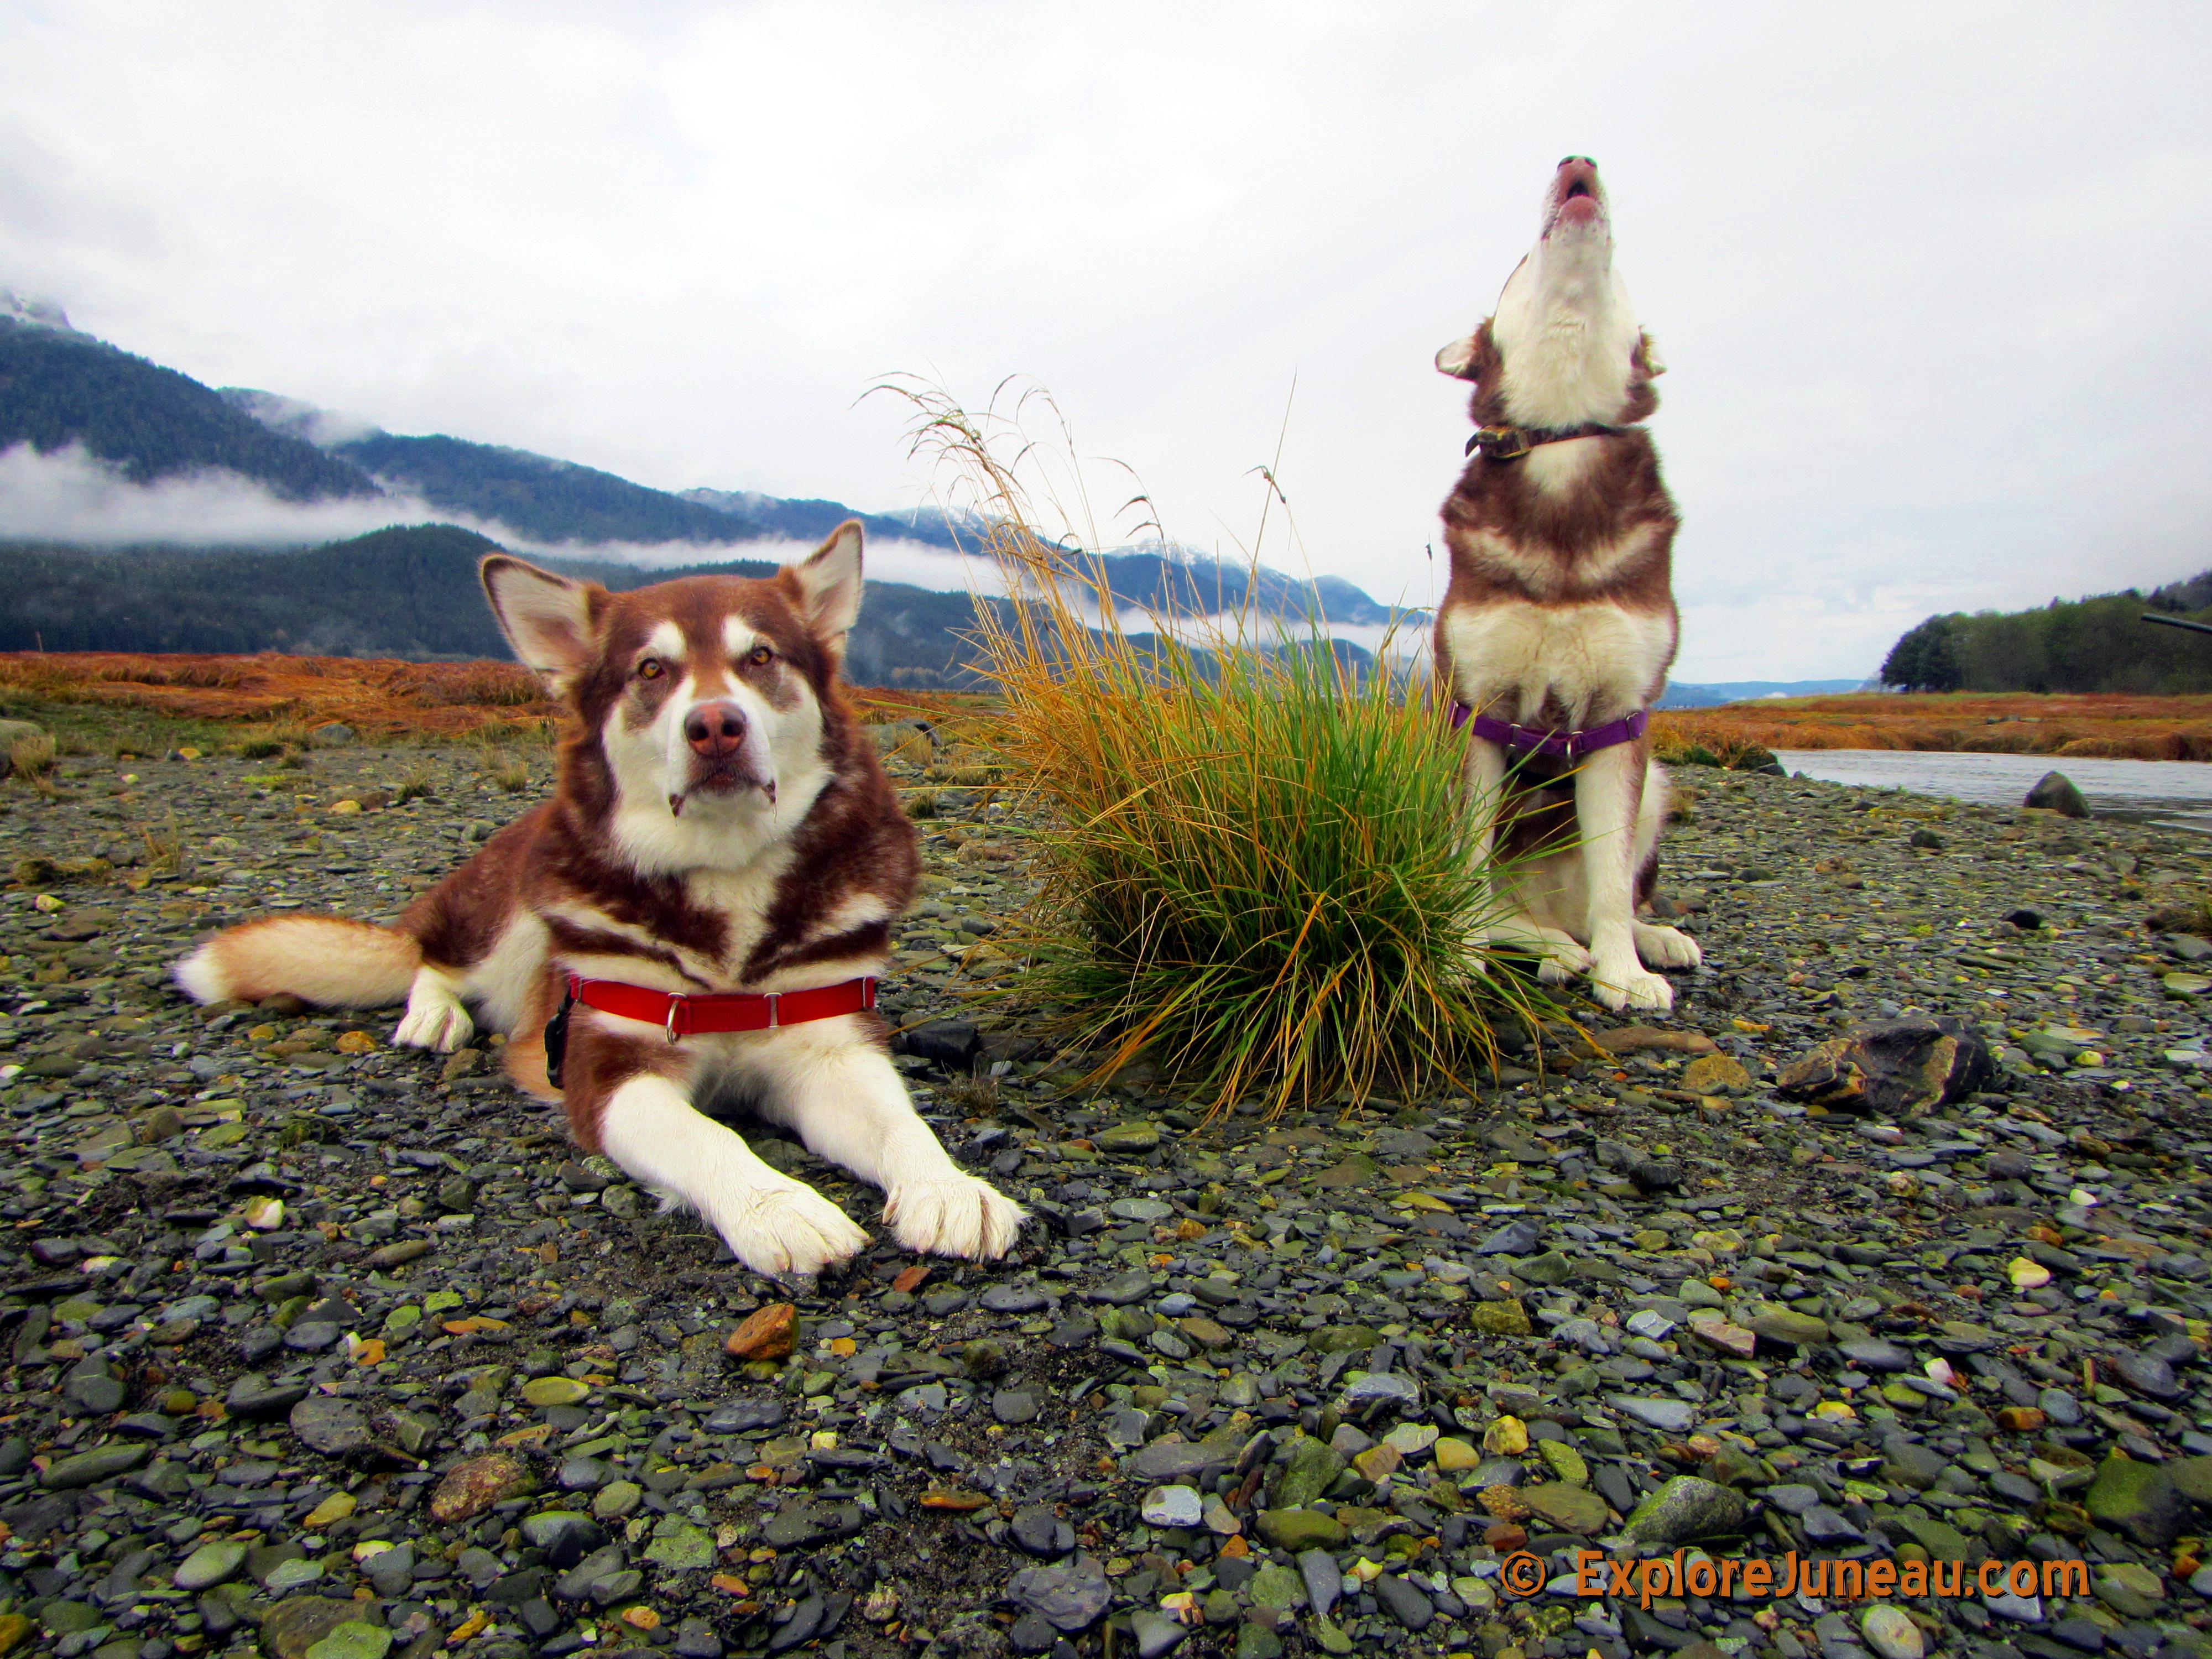 Put the WOOoo in I LOVE YOU! Freya and Skadi with Russell Josh Peterson @ Sheep Creek, Juneau Alaska. Thank you for your Kindness and Support please click Like on each photo and demo reel you enjoy!